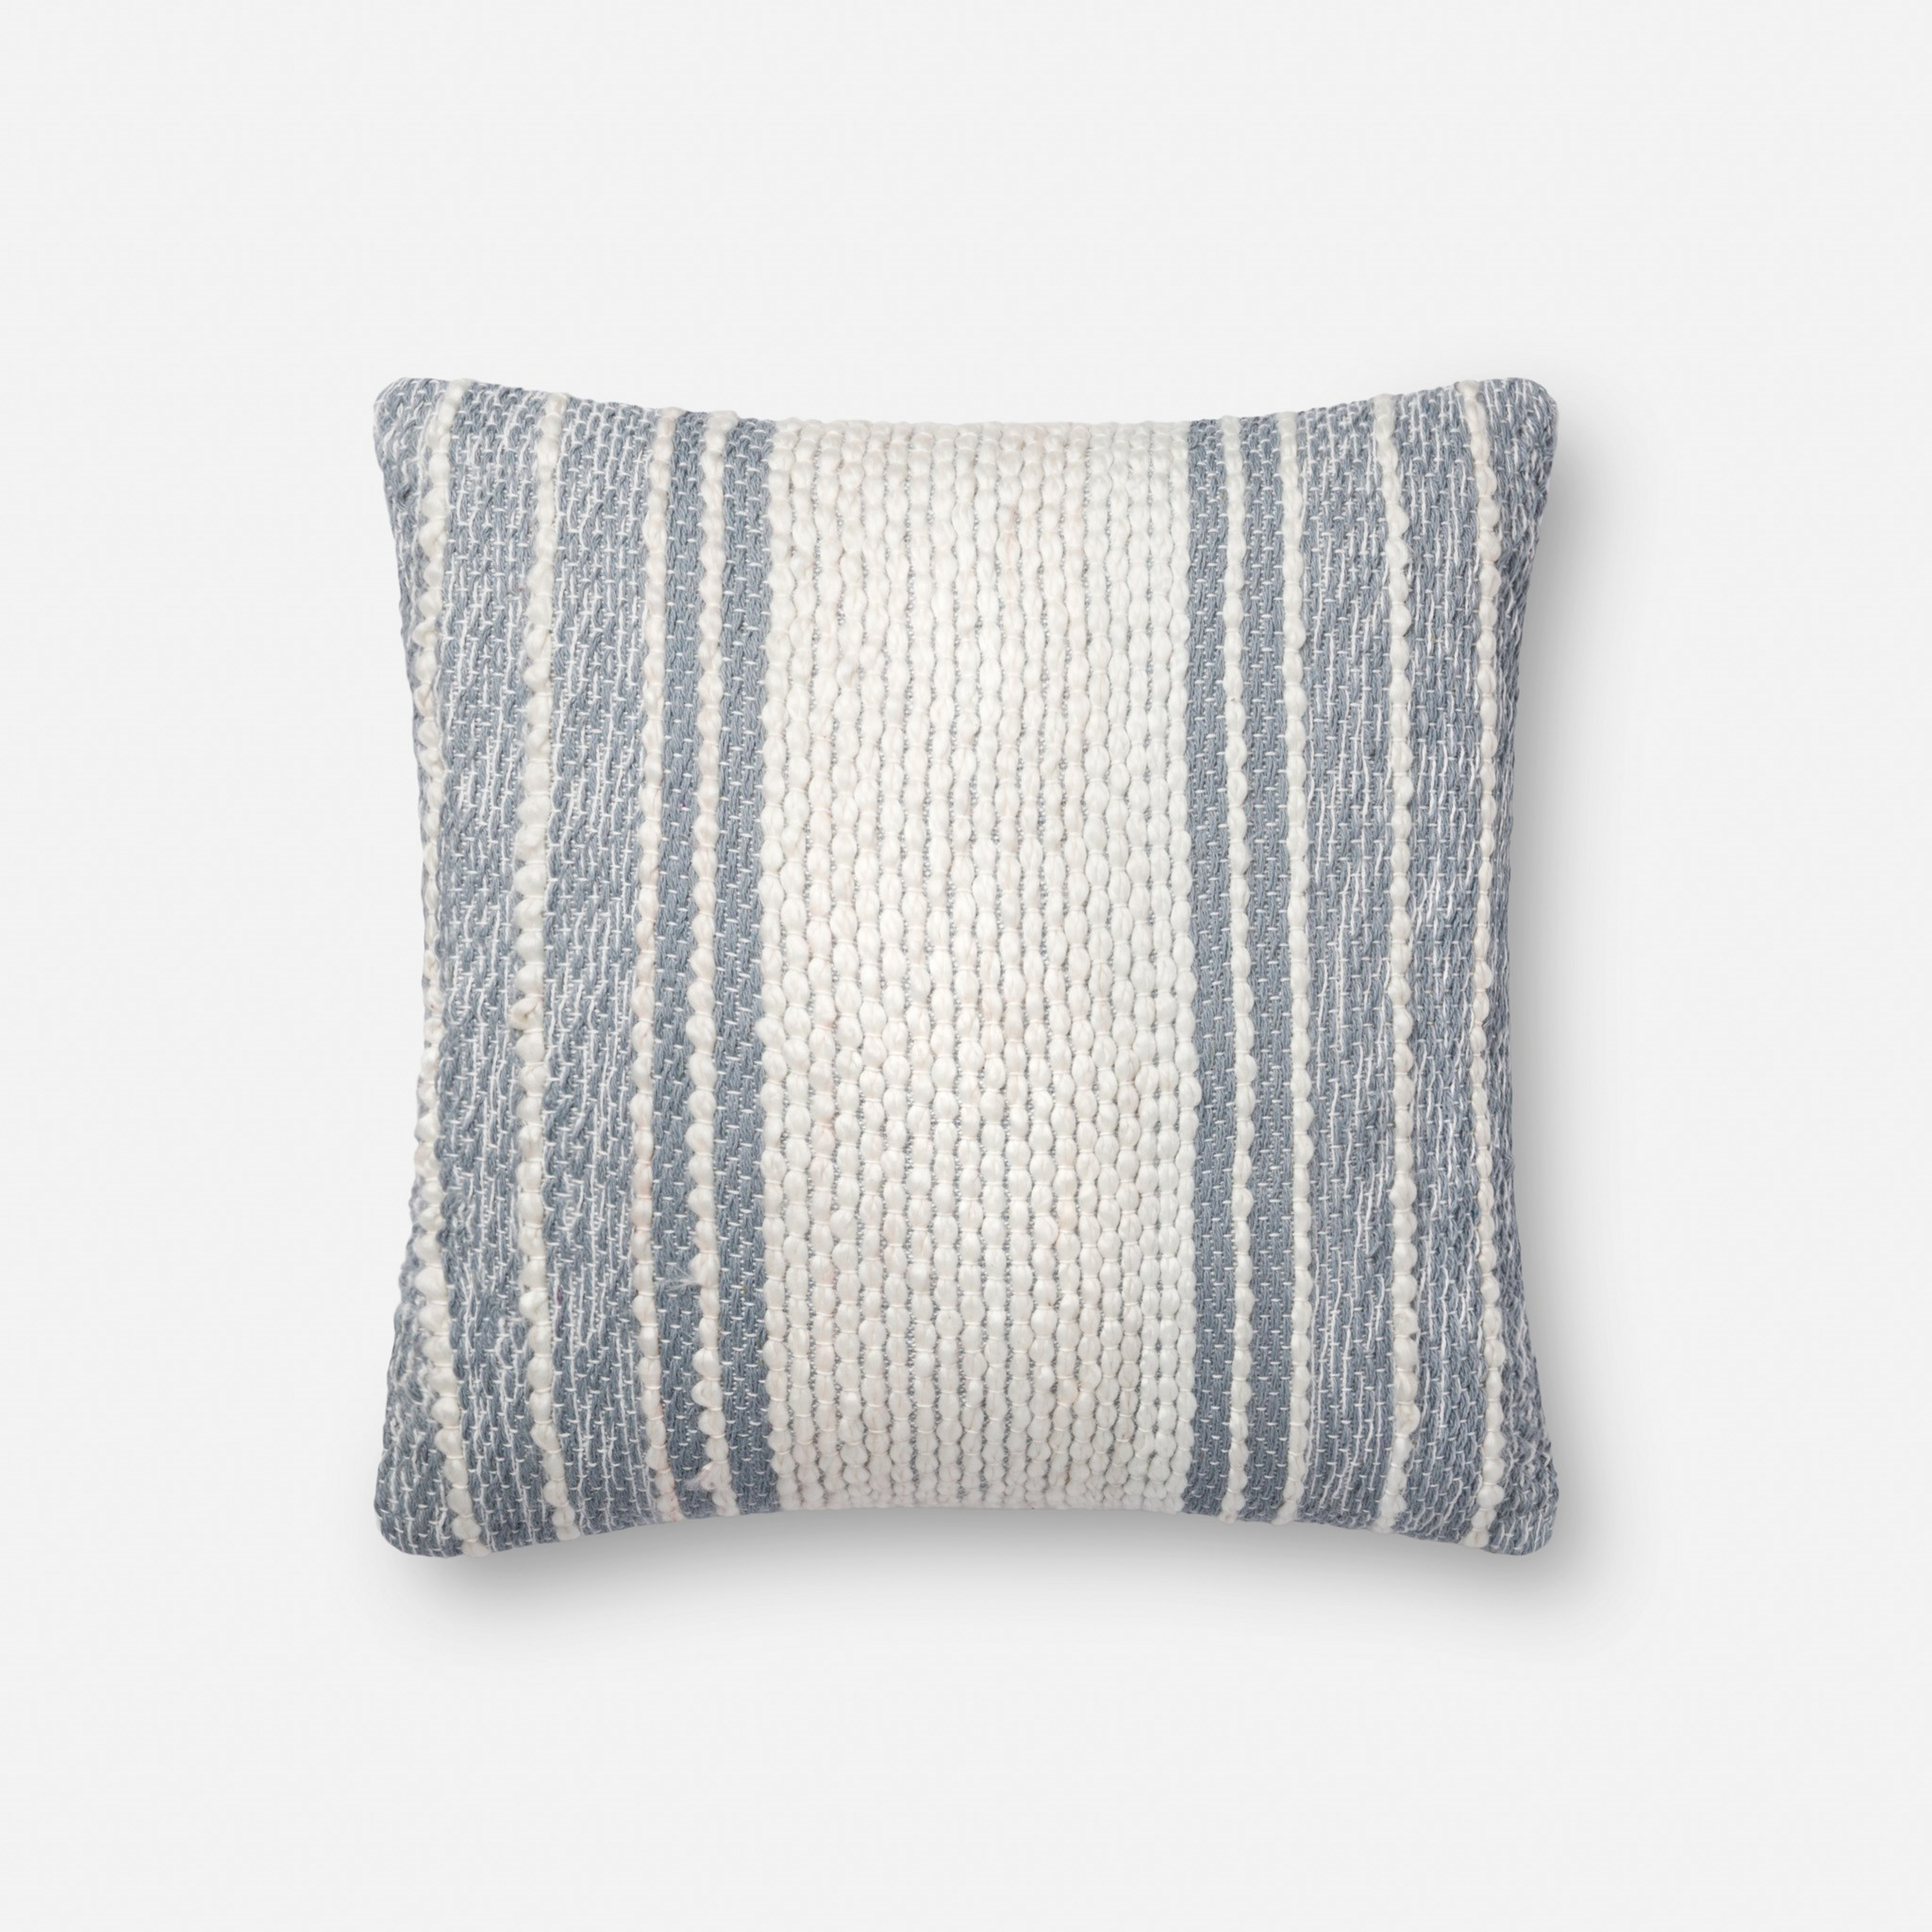 PILLOWS - BLUE / IVORY - Loloi Rugs